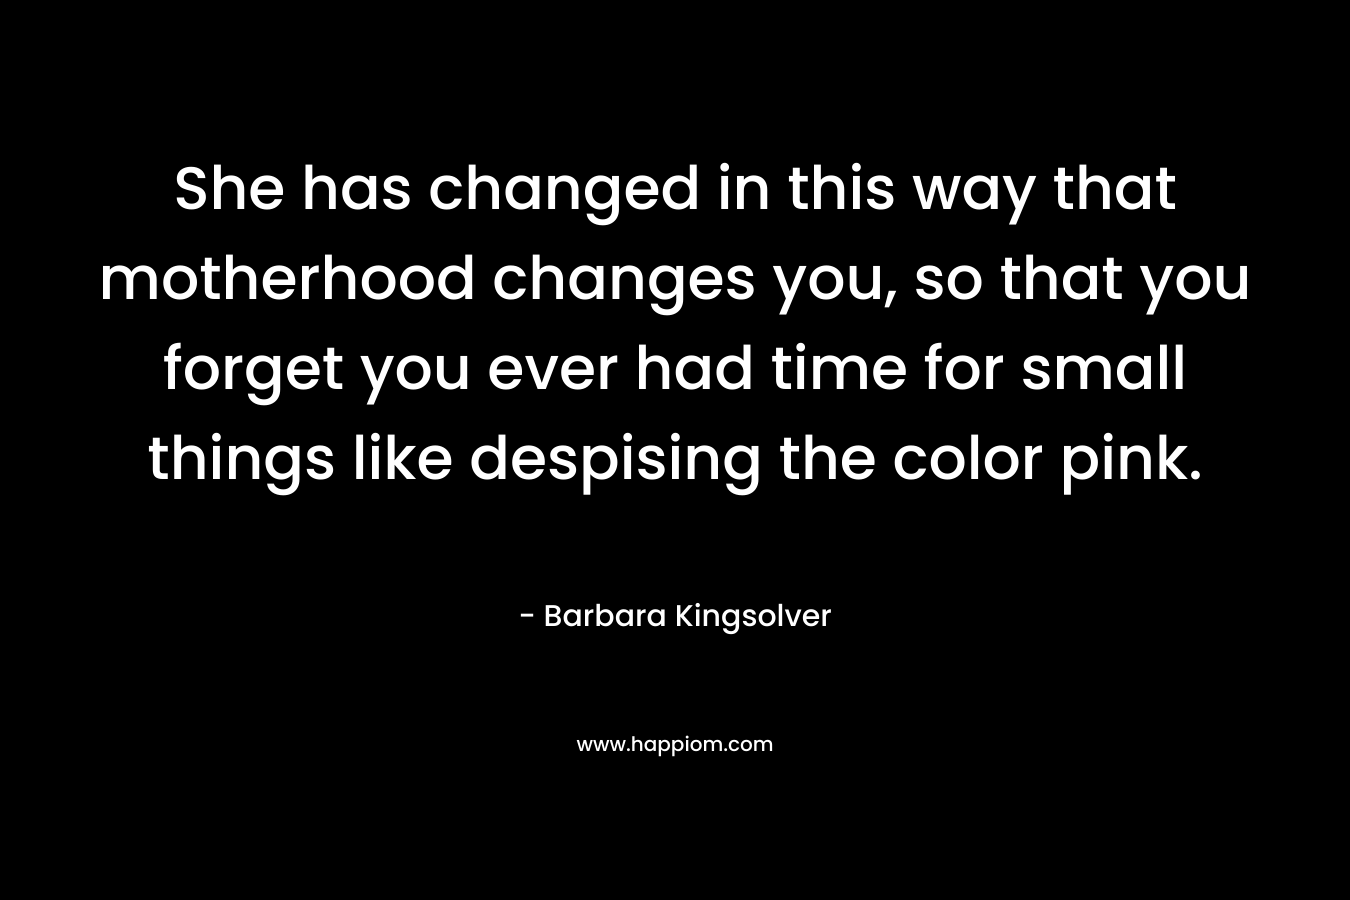 She has changed in this way that motherhood changes you, so that you forget you ever had time for small things like despising the color pink. – Barbara Kingsolver